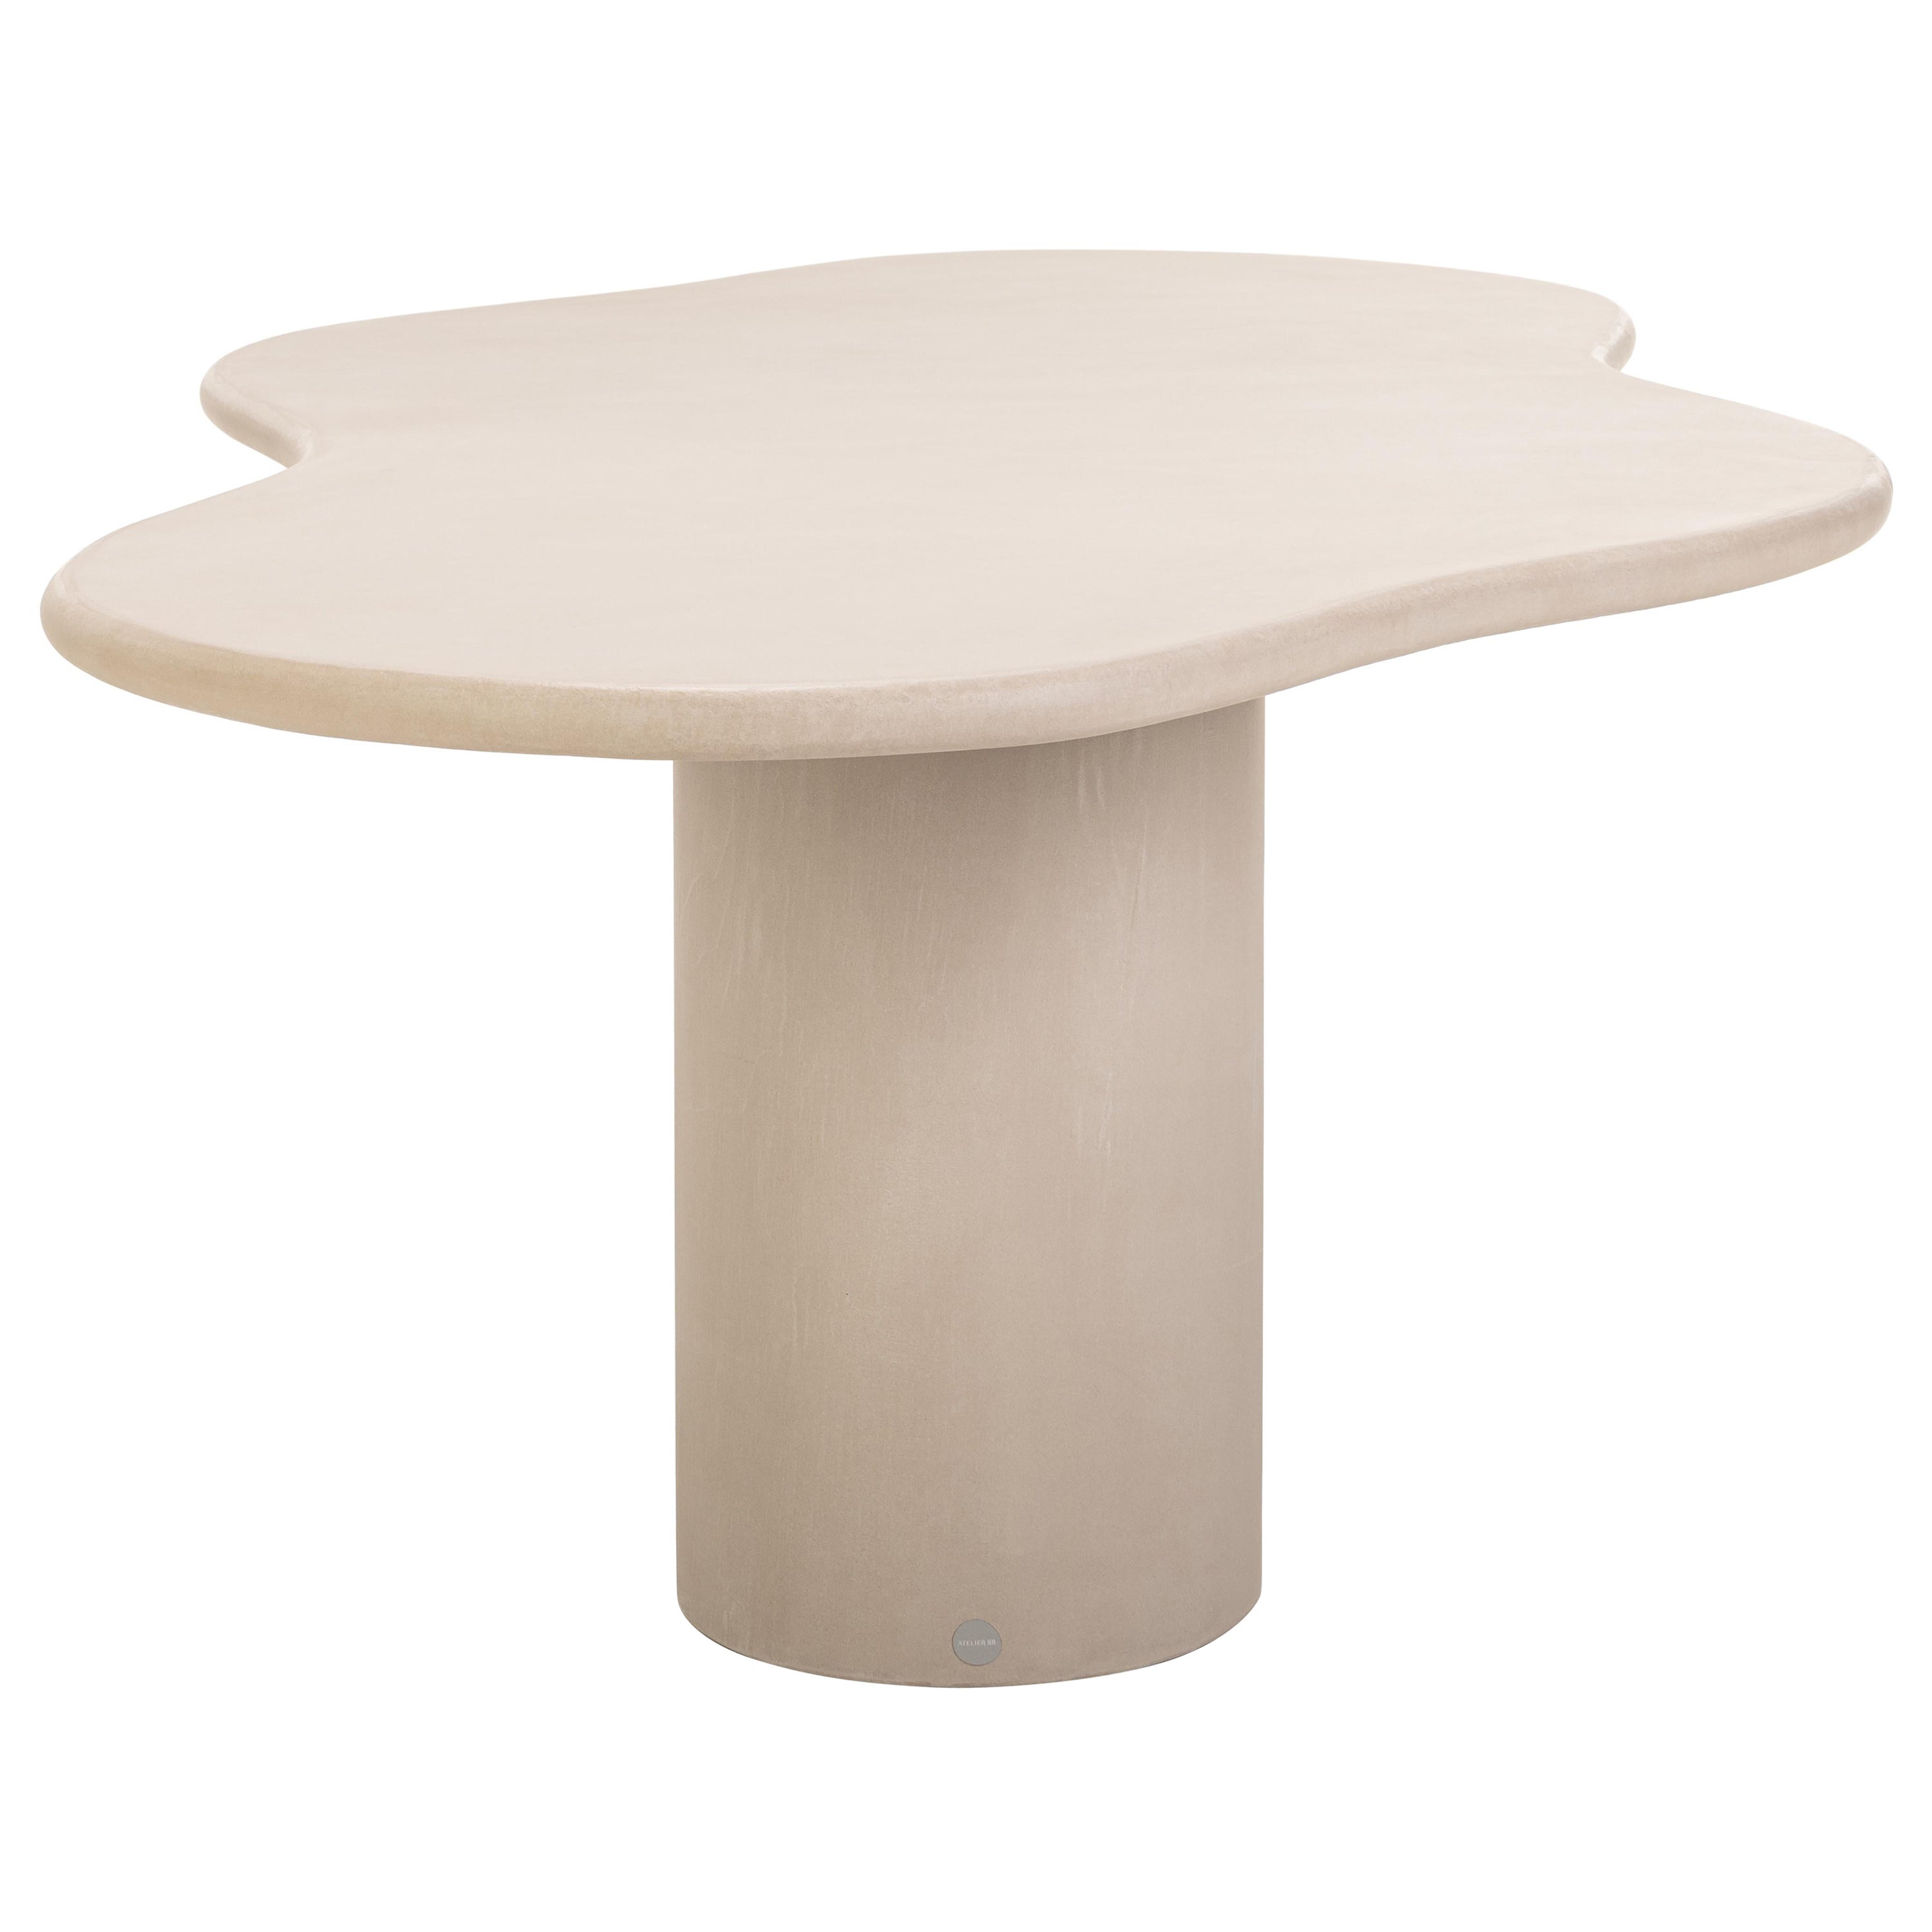 Natural Plaster Dining Table "Fluent" 280 by Isabelle Beaumont For Sale